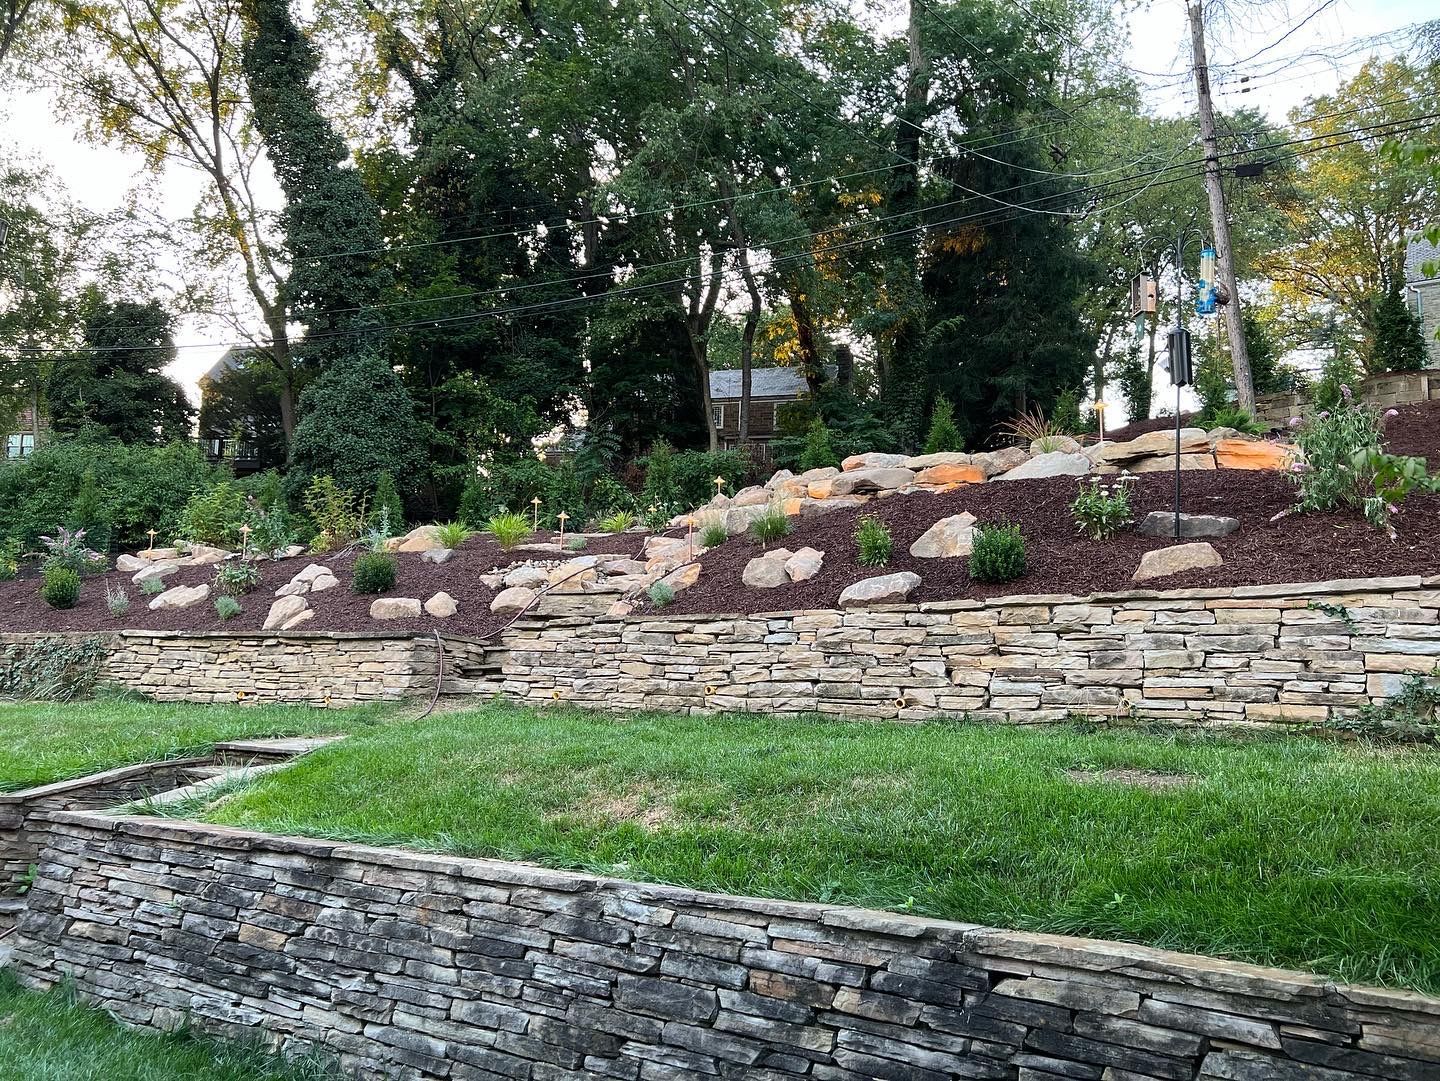 yard cleaned up, replaced weeds with garden beds, and stone wall, and boulder features